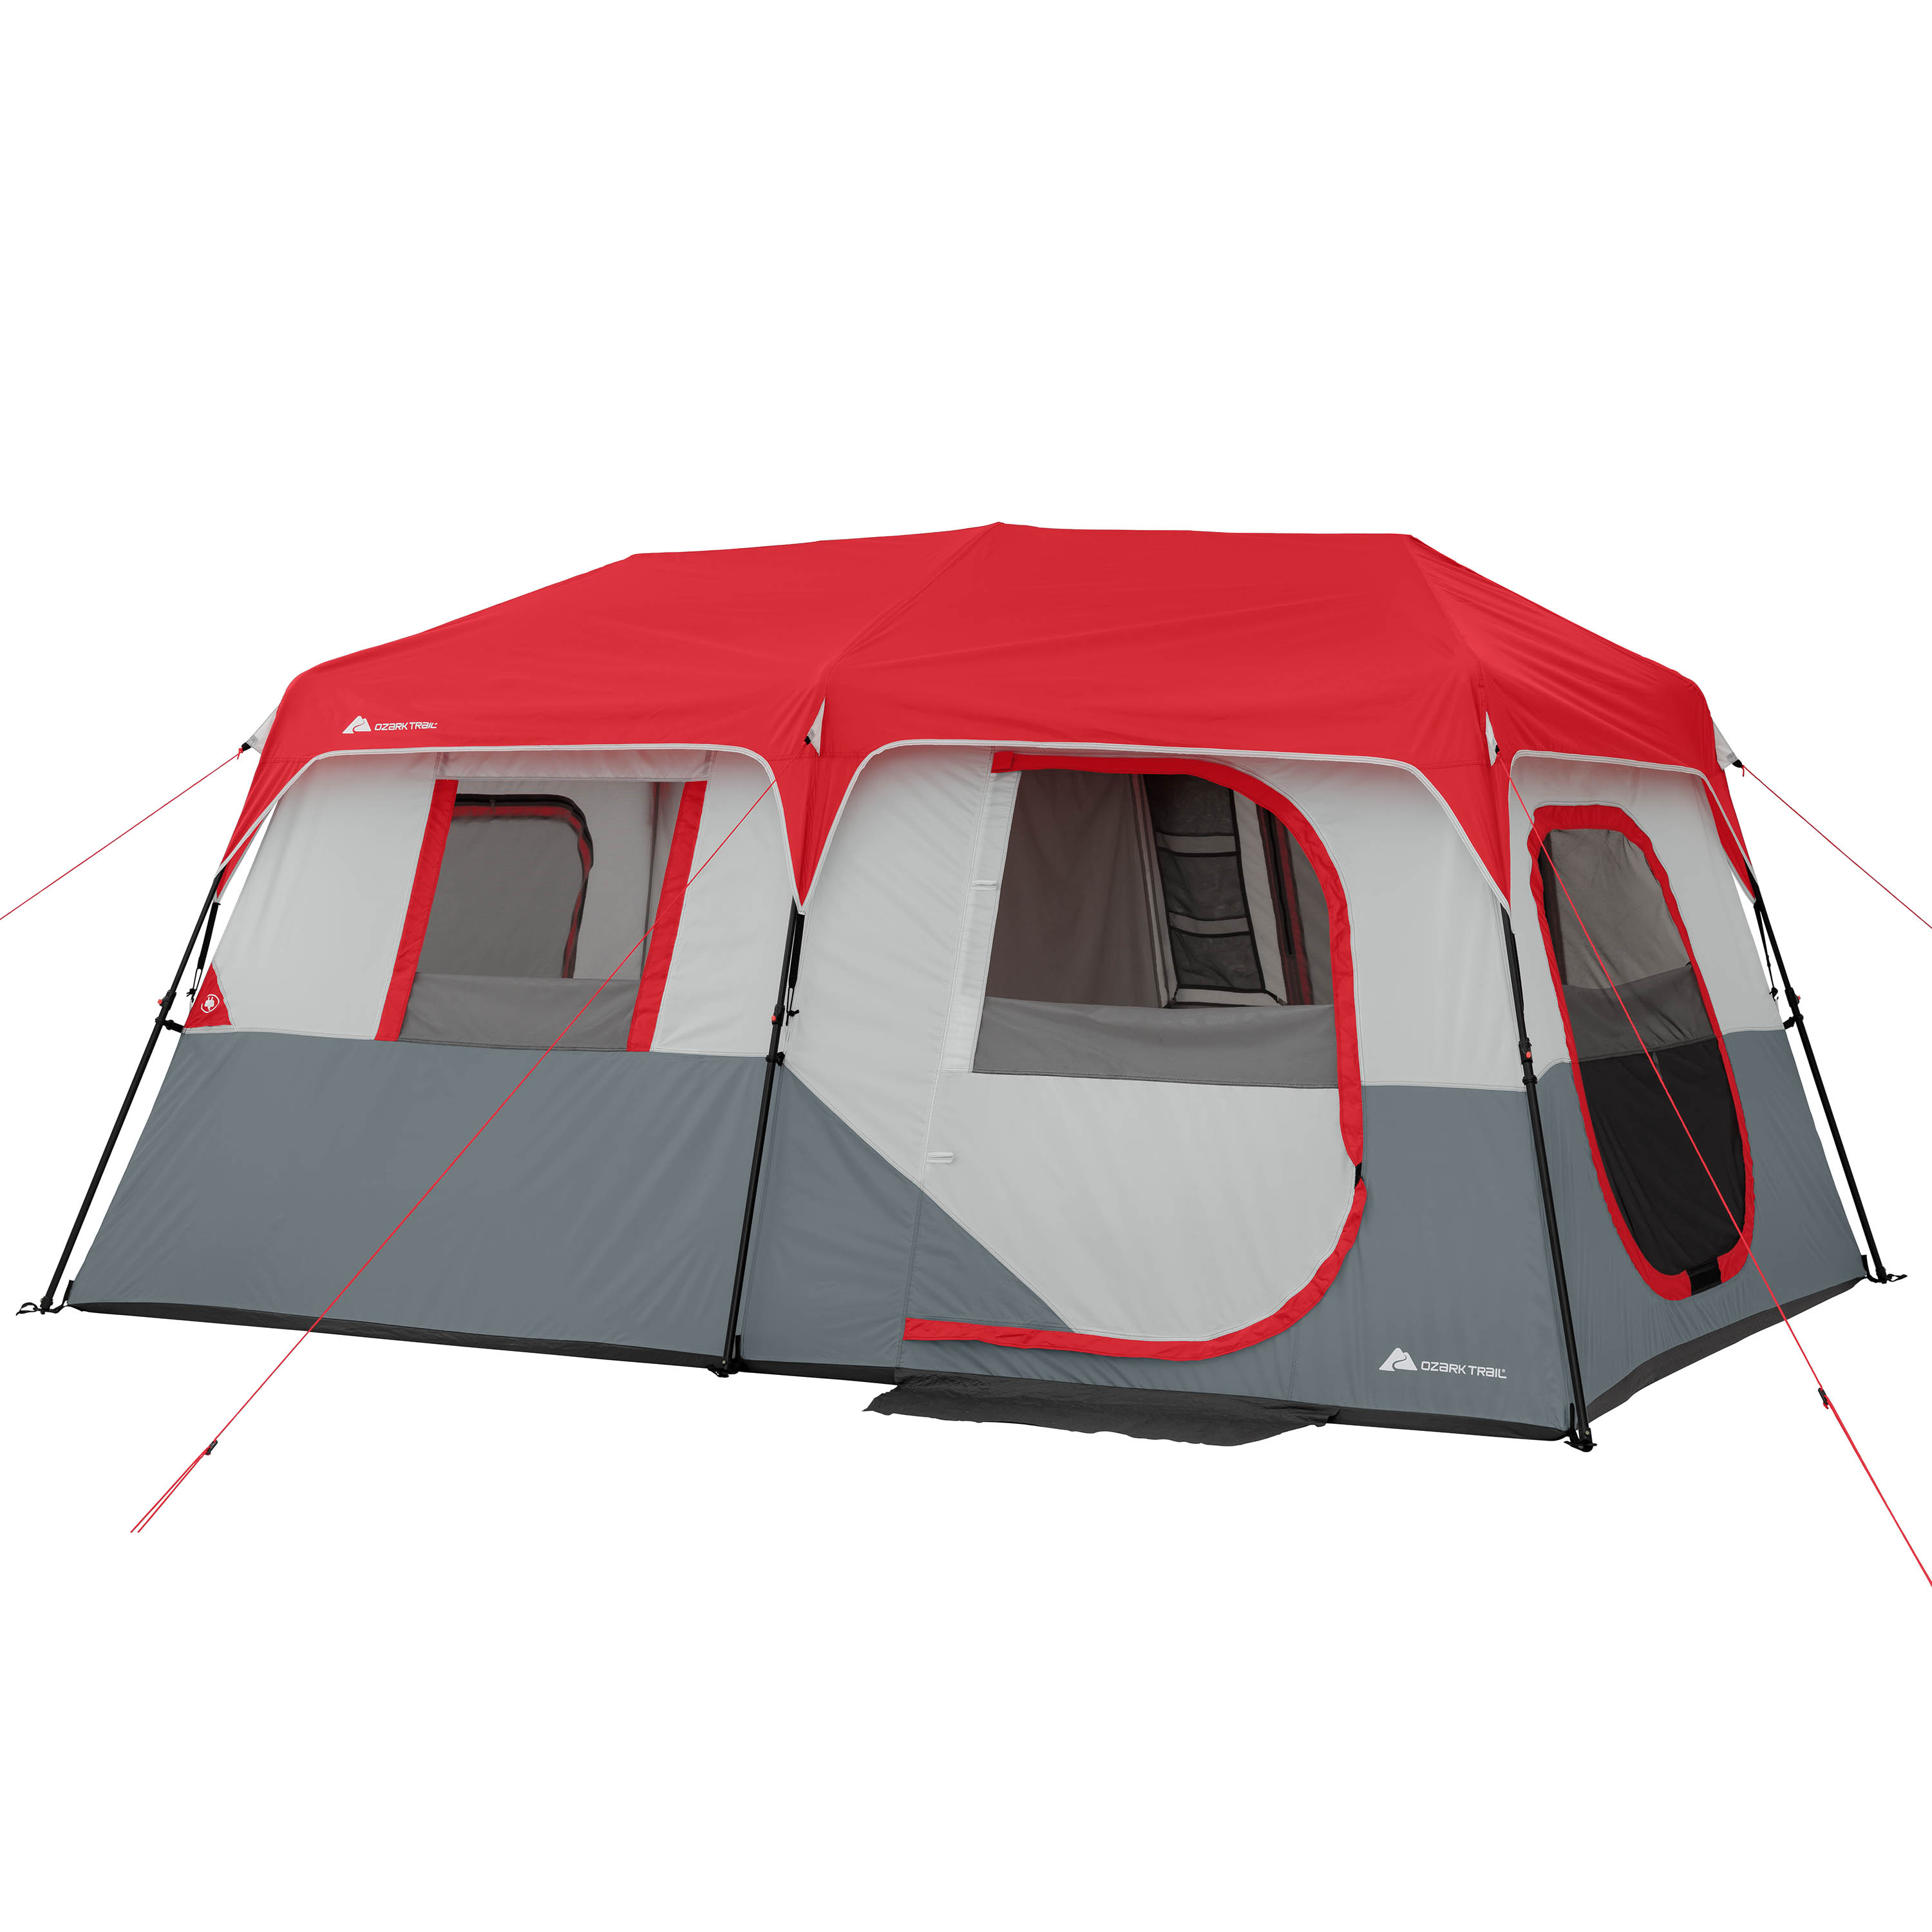 Ozark Trail 13' x 9' 8-Person Instant Cabin Tent with LED Lights, 36.9274 lbs - image 1 of 11